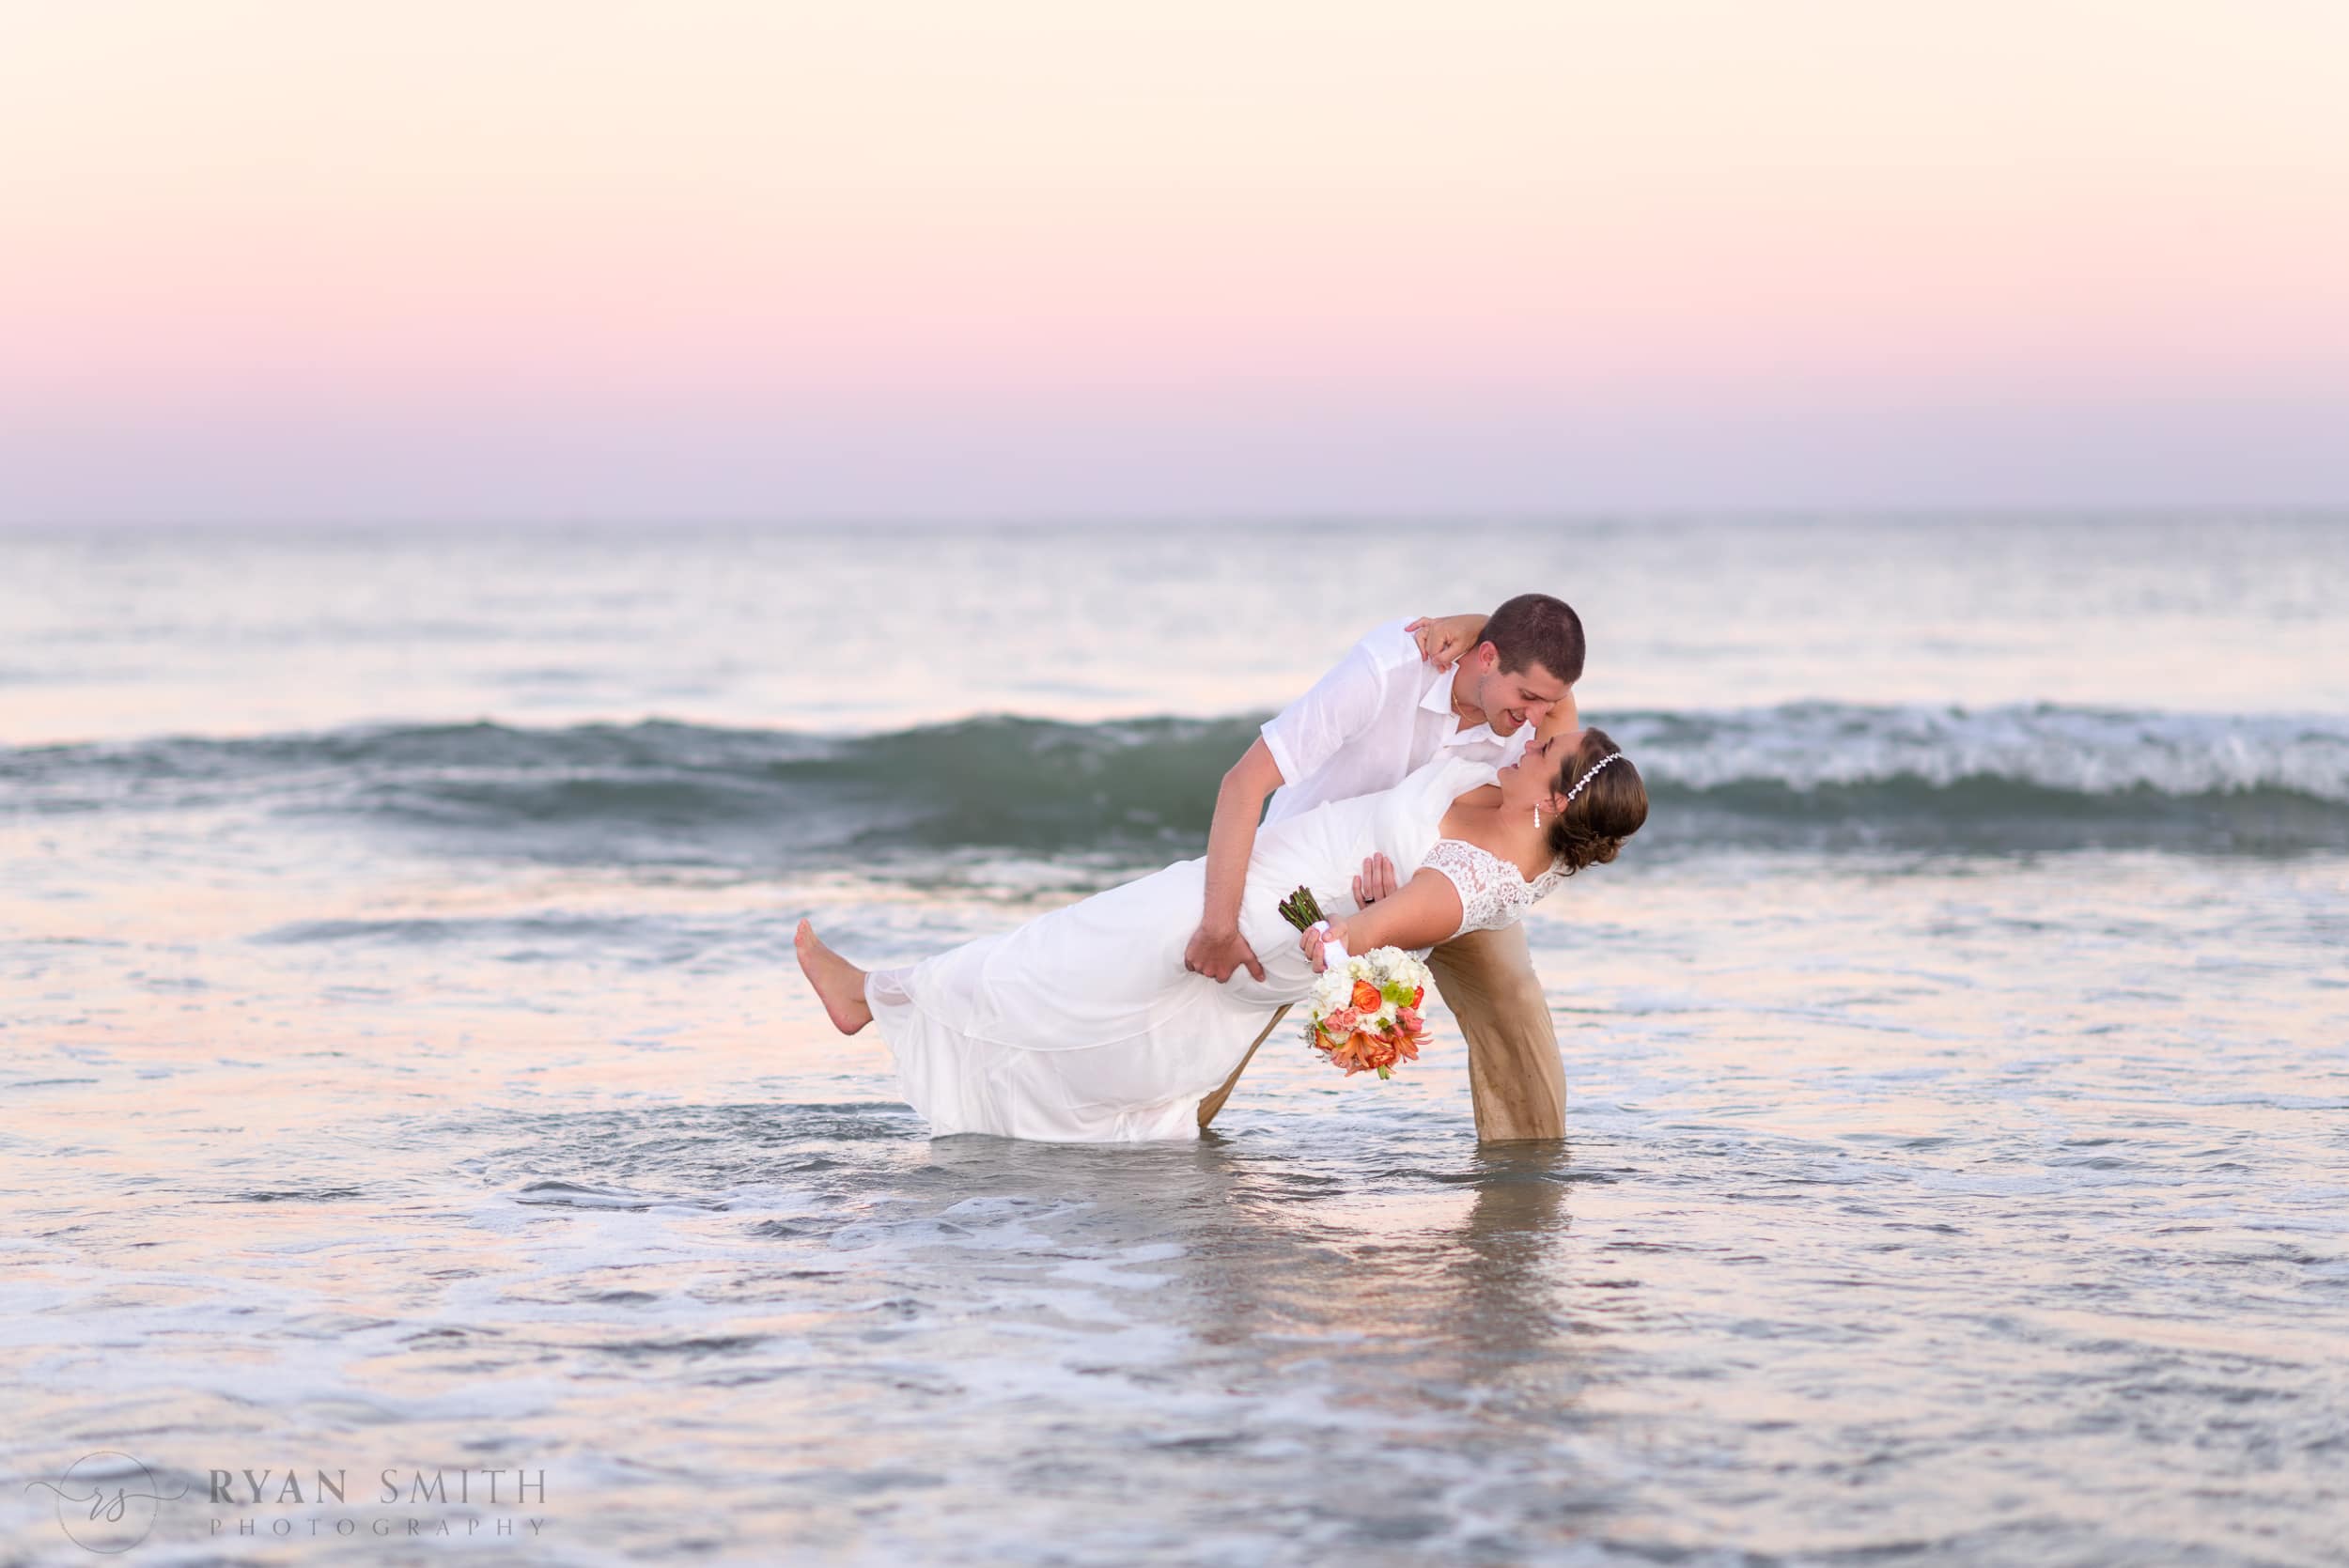 Dipping bride into ocean at sunset - Myrtle Beach